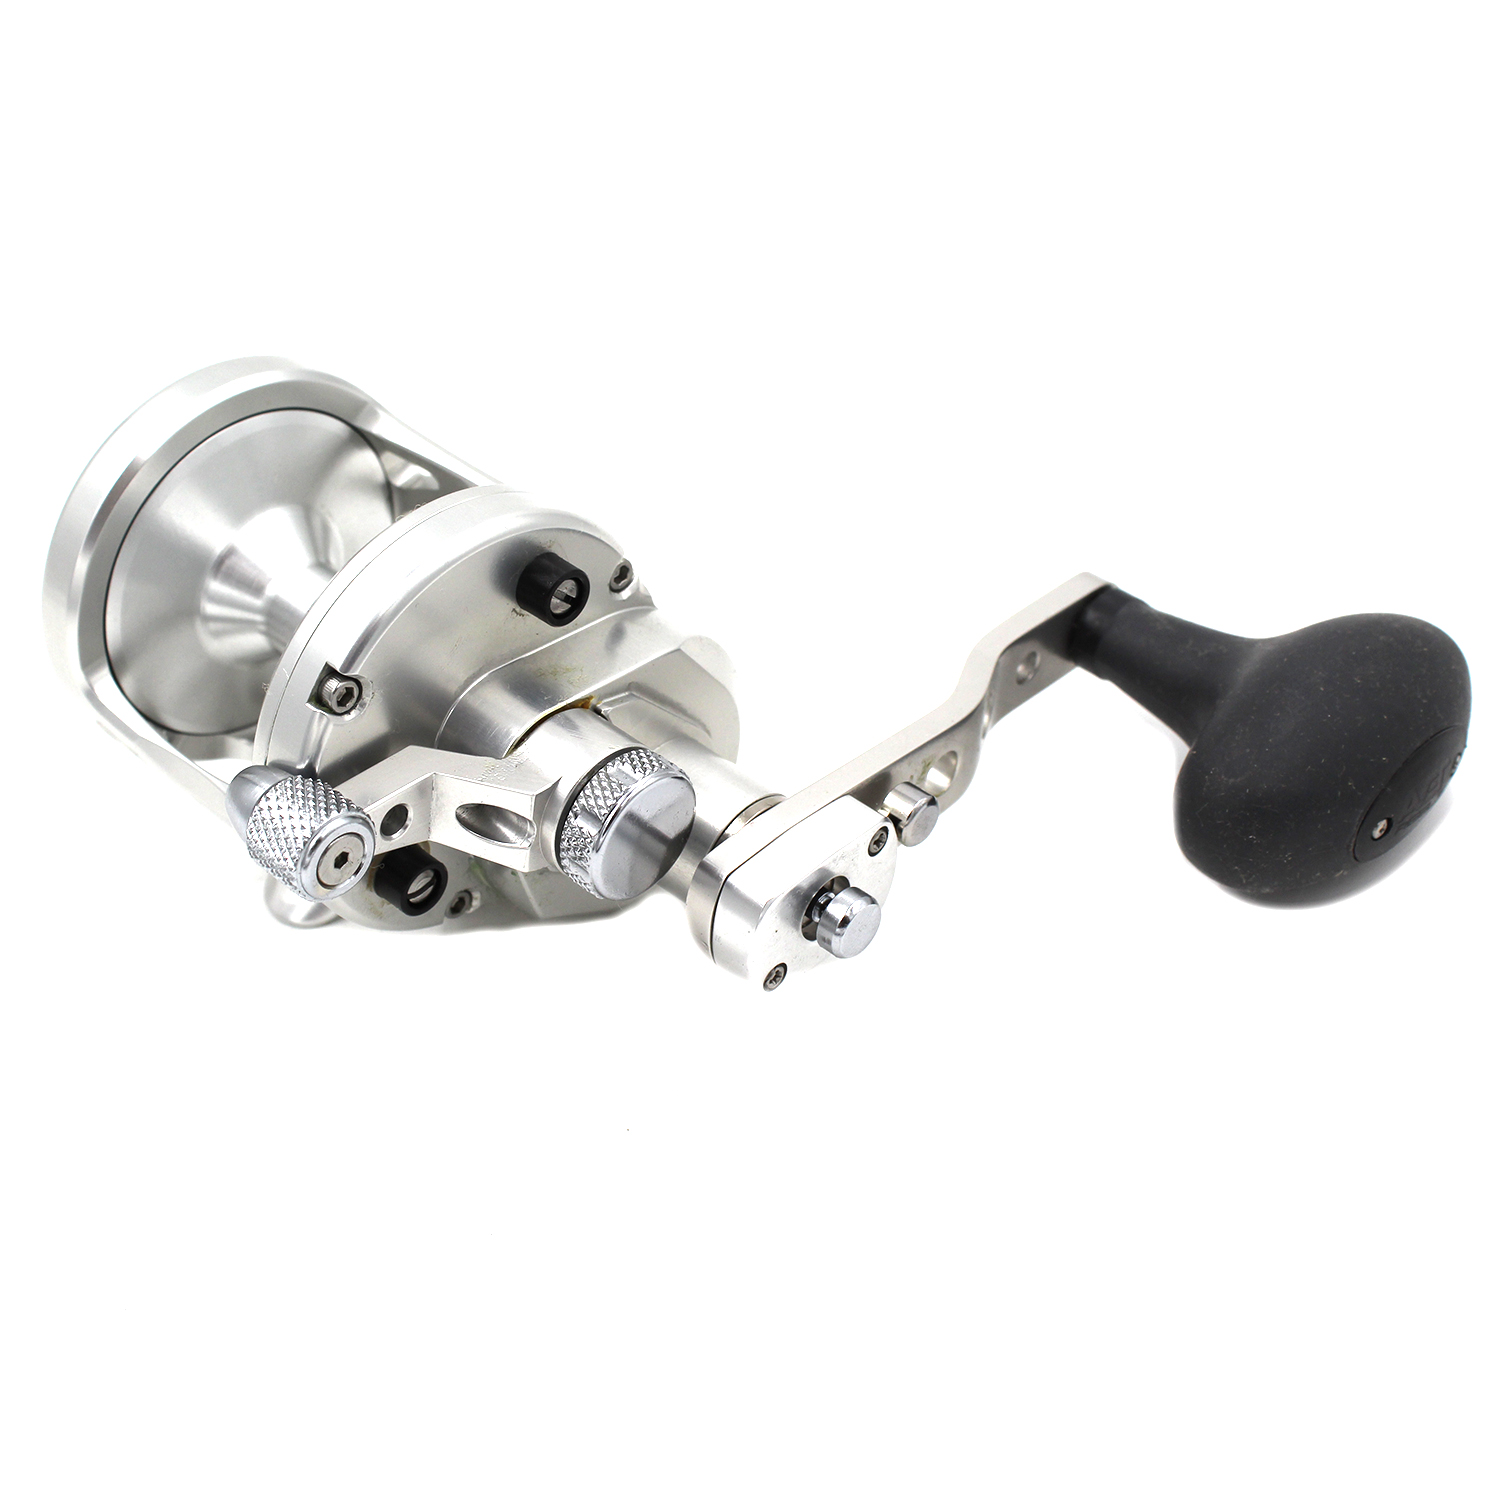 AVET G2 SX 6/4 Conventional 2-Speed Lever Drag Reels